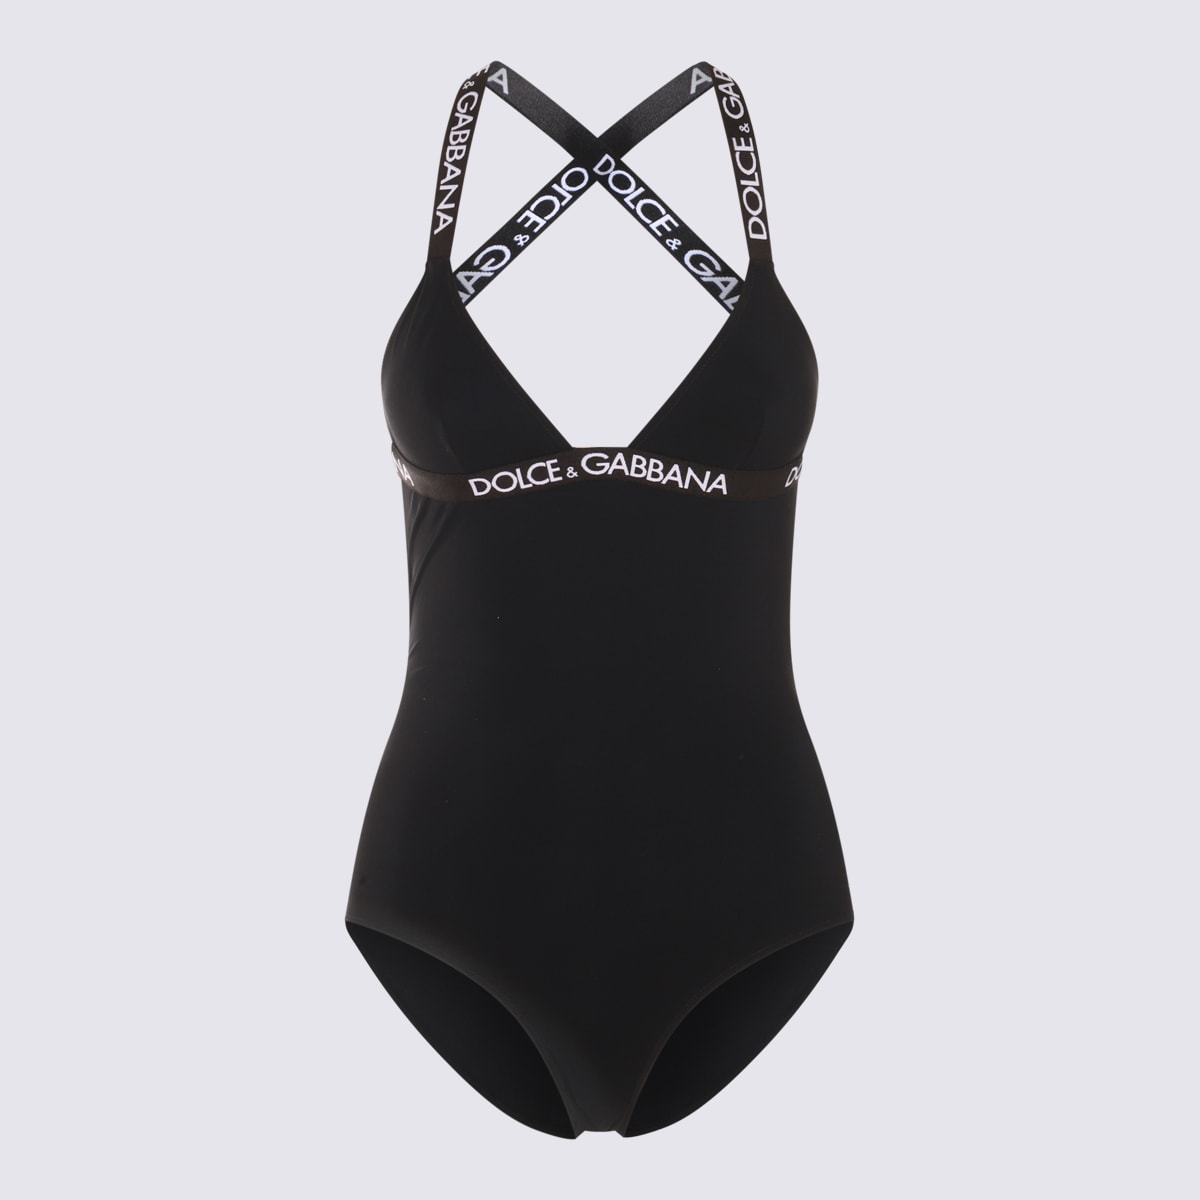 Dolce & Gabbana Black And White Swimsuit